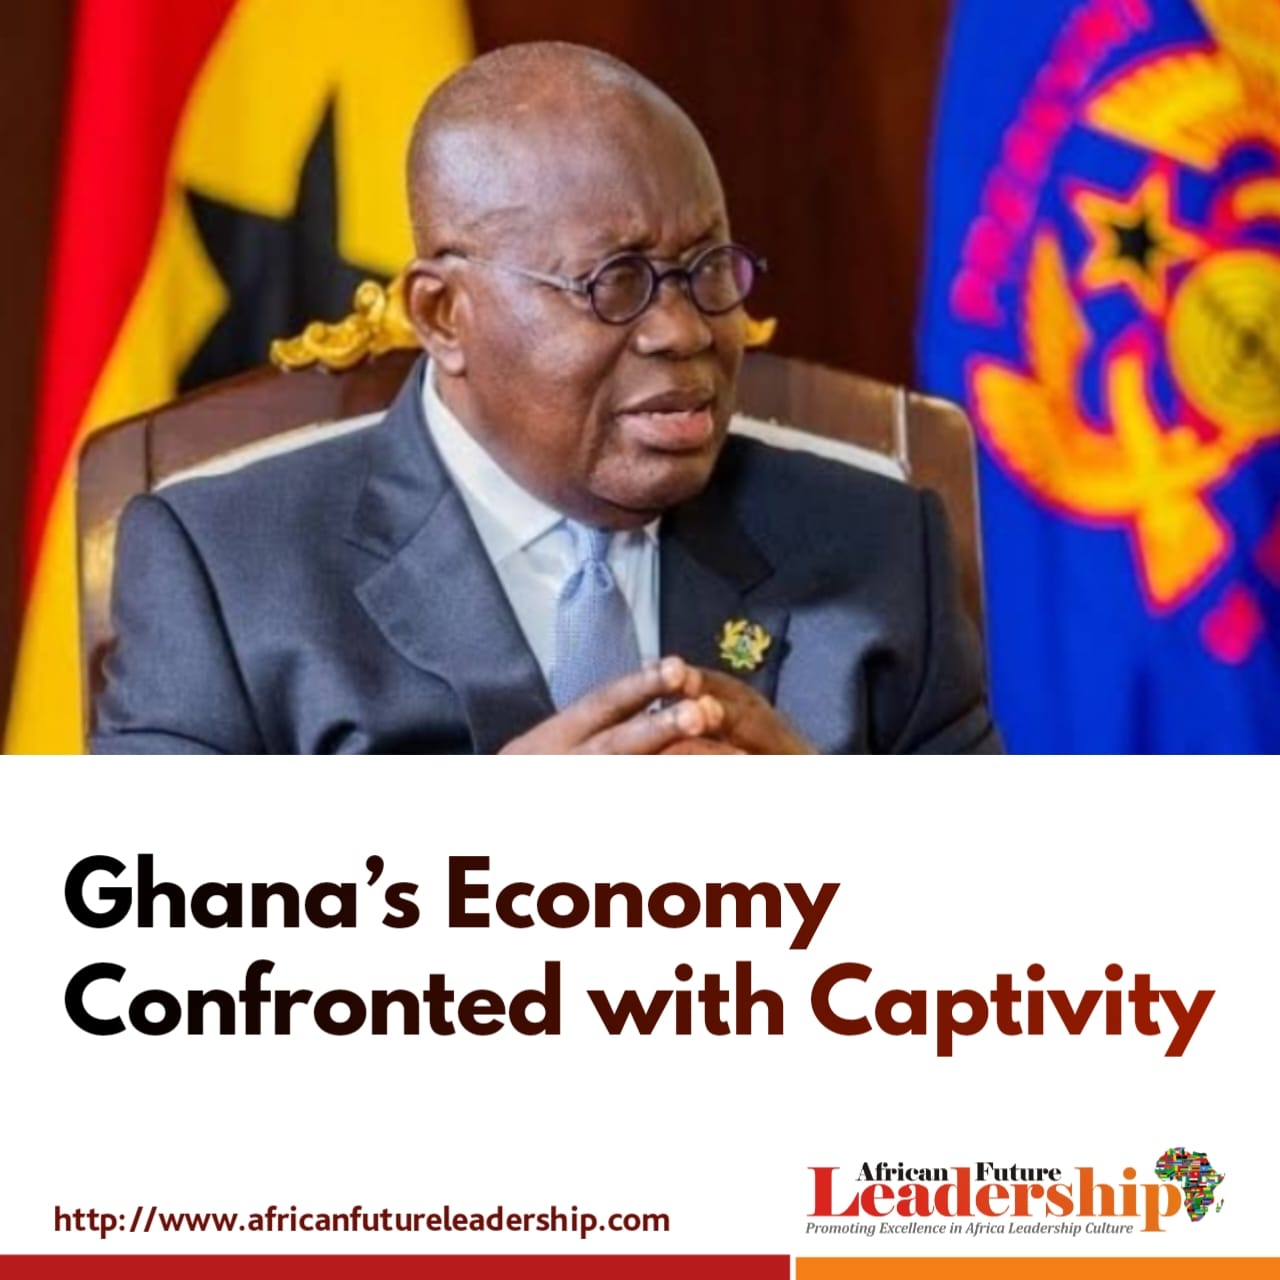 Ghana’s Economy Confronted with Captivity